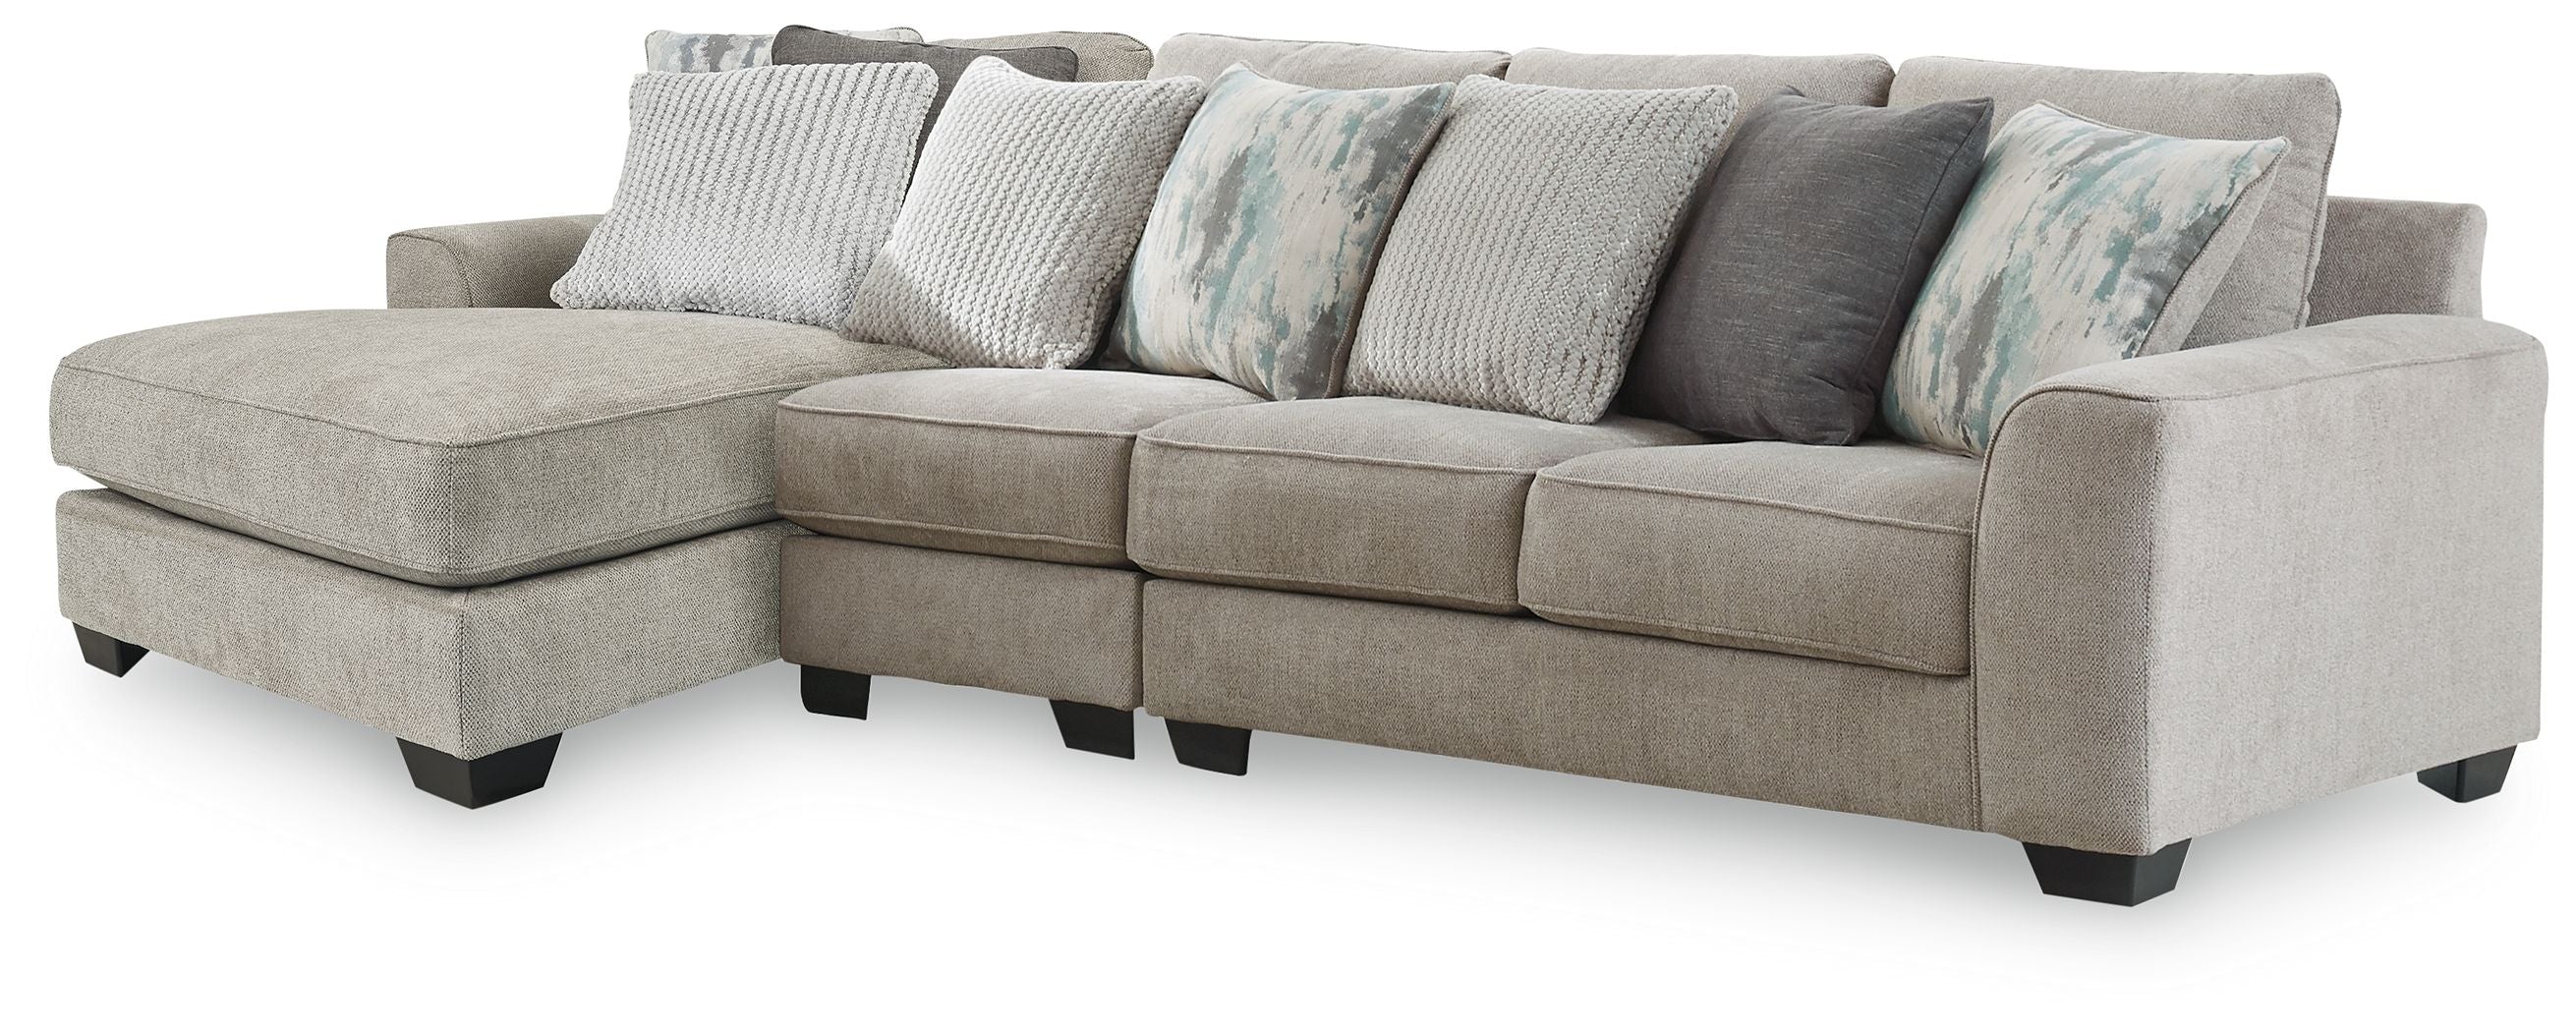 Benchcraft® - Ardsley - Pewter - 3-Piece Sectional With Laf Corner Chaise - 5th Avenue Furniture